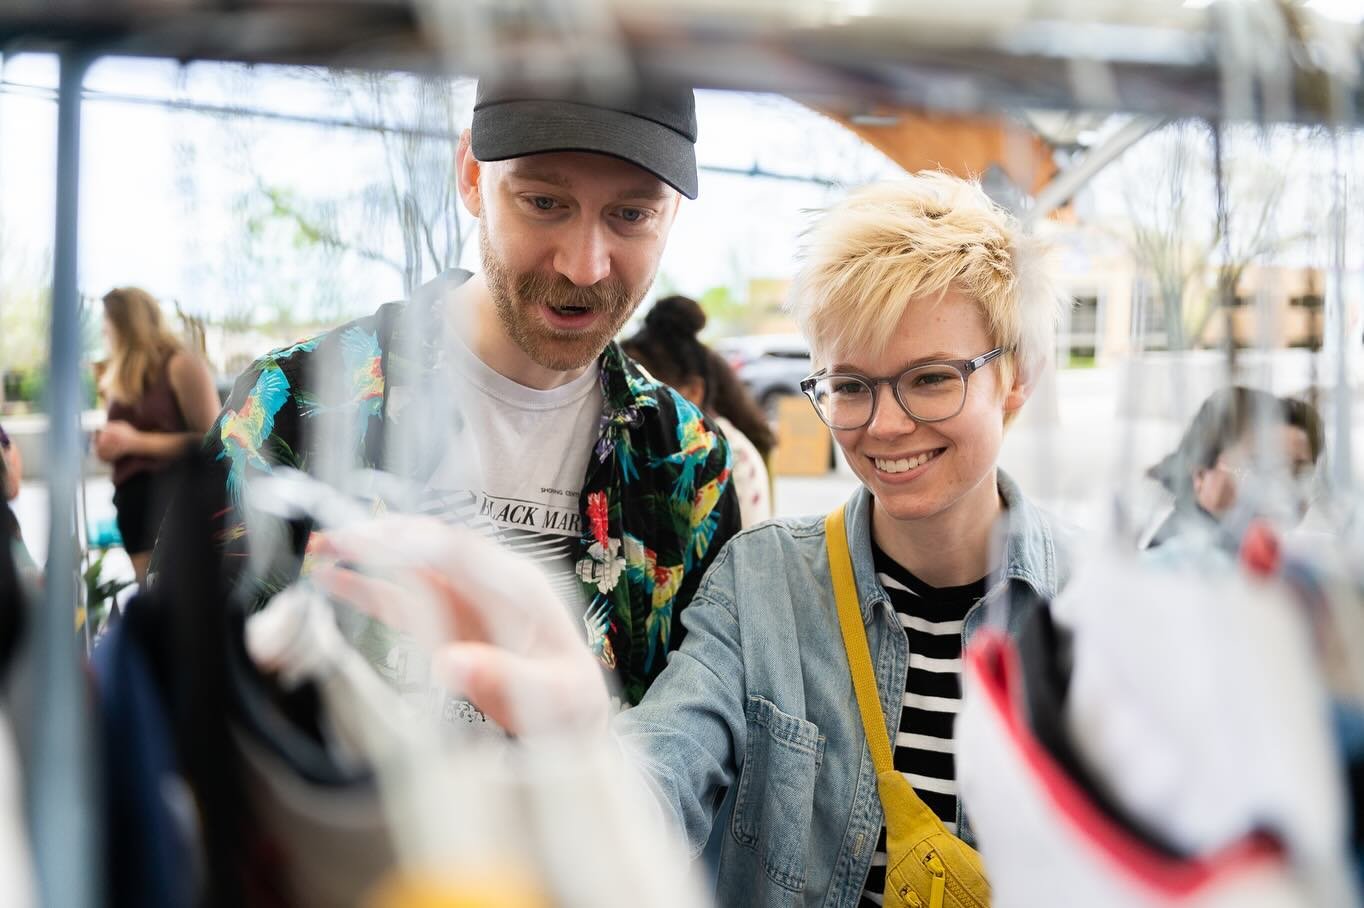 🗓️🛍️Save the date vintage fam! The Minneapolis Vintage Market is headed BACK to @stlouispark ROC on Saturday, May 11th 11 am - 4 pm. 

Update your spring/summer ☀️style with Minnesota&rsquo;s best vendors, who thoughtfully curate their selection of